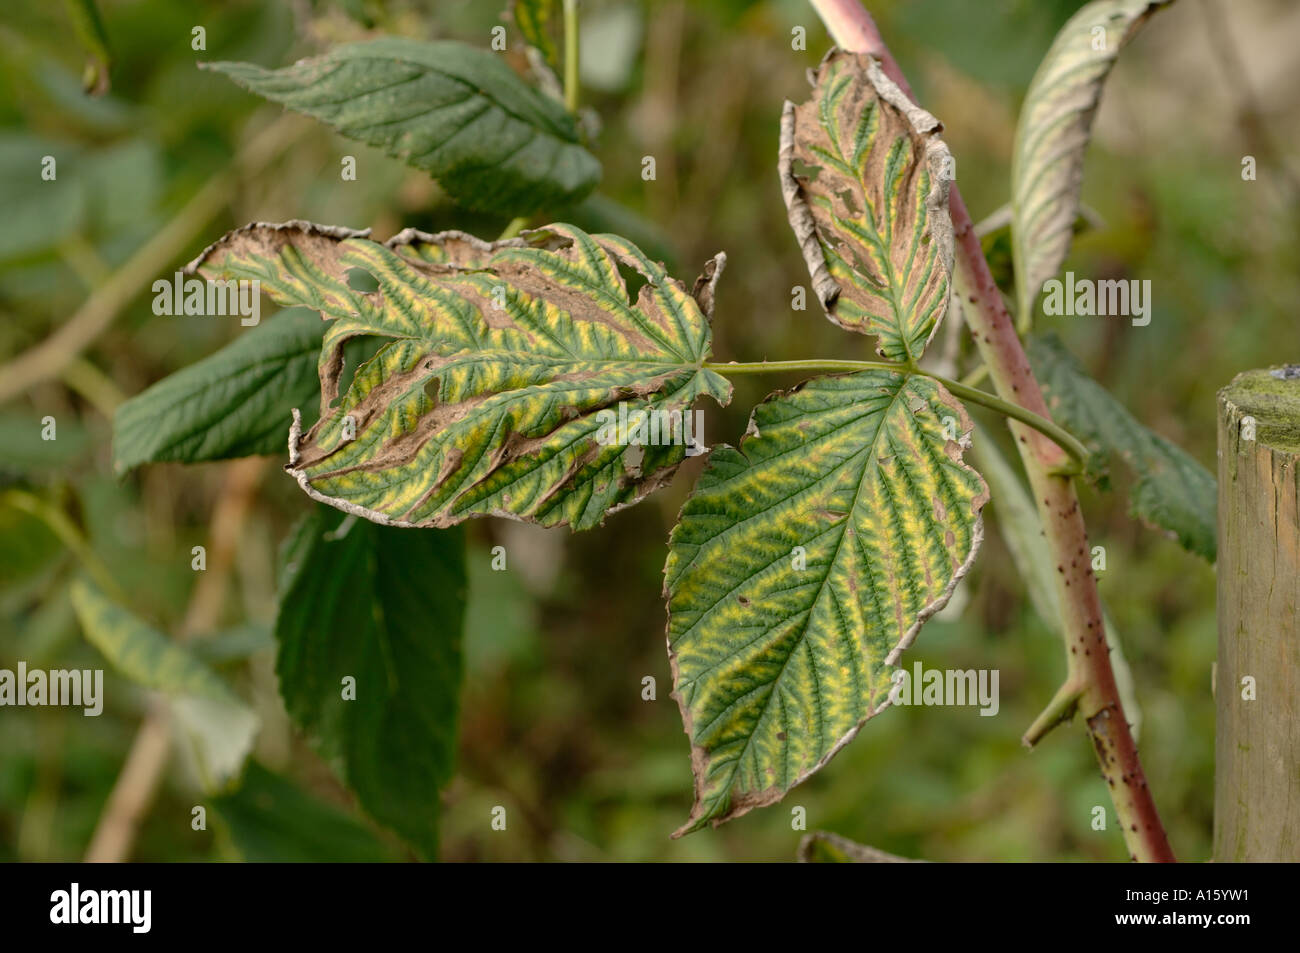 Contamination damage to raspberry leaves caused by glyphosate weedkiller contact Stock Photo